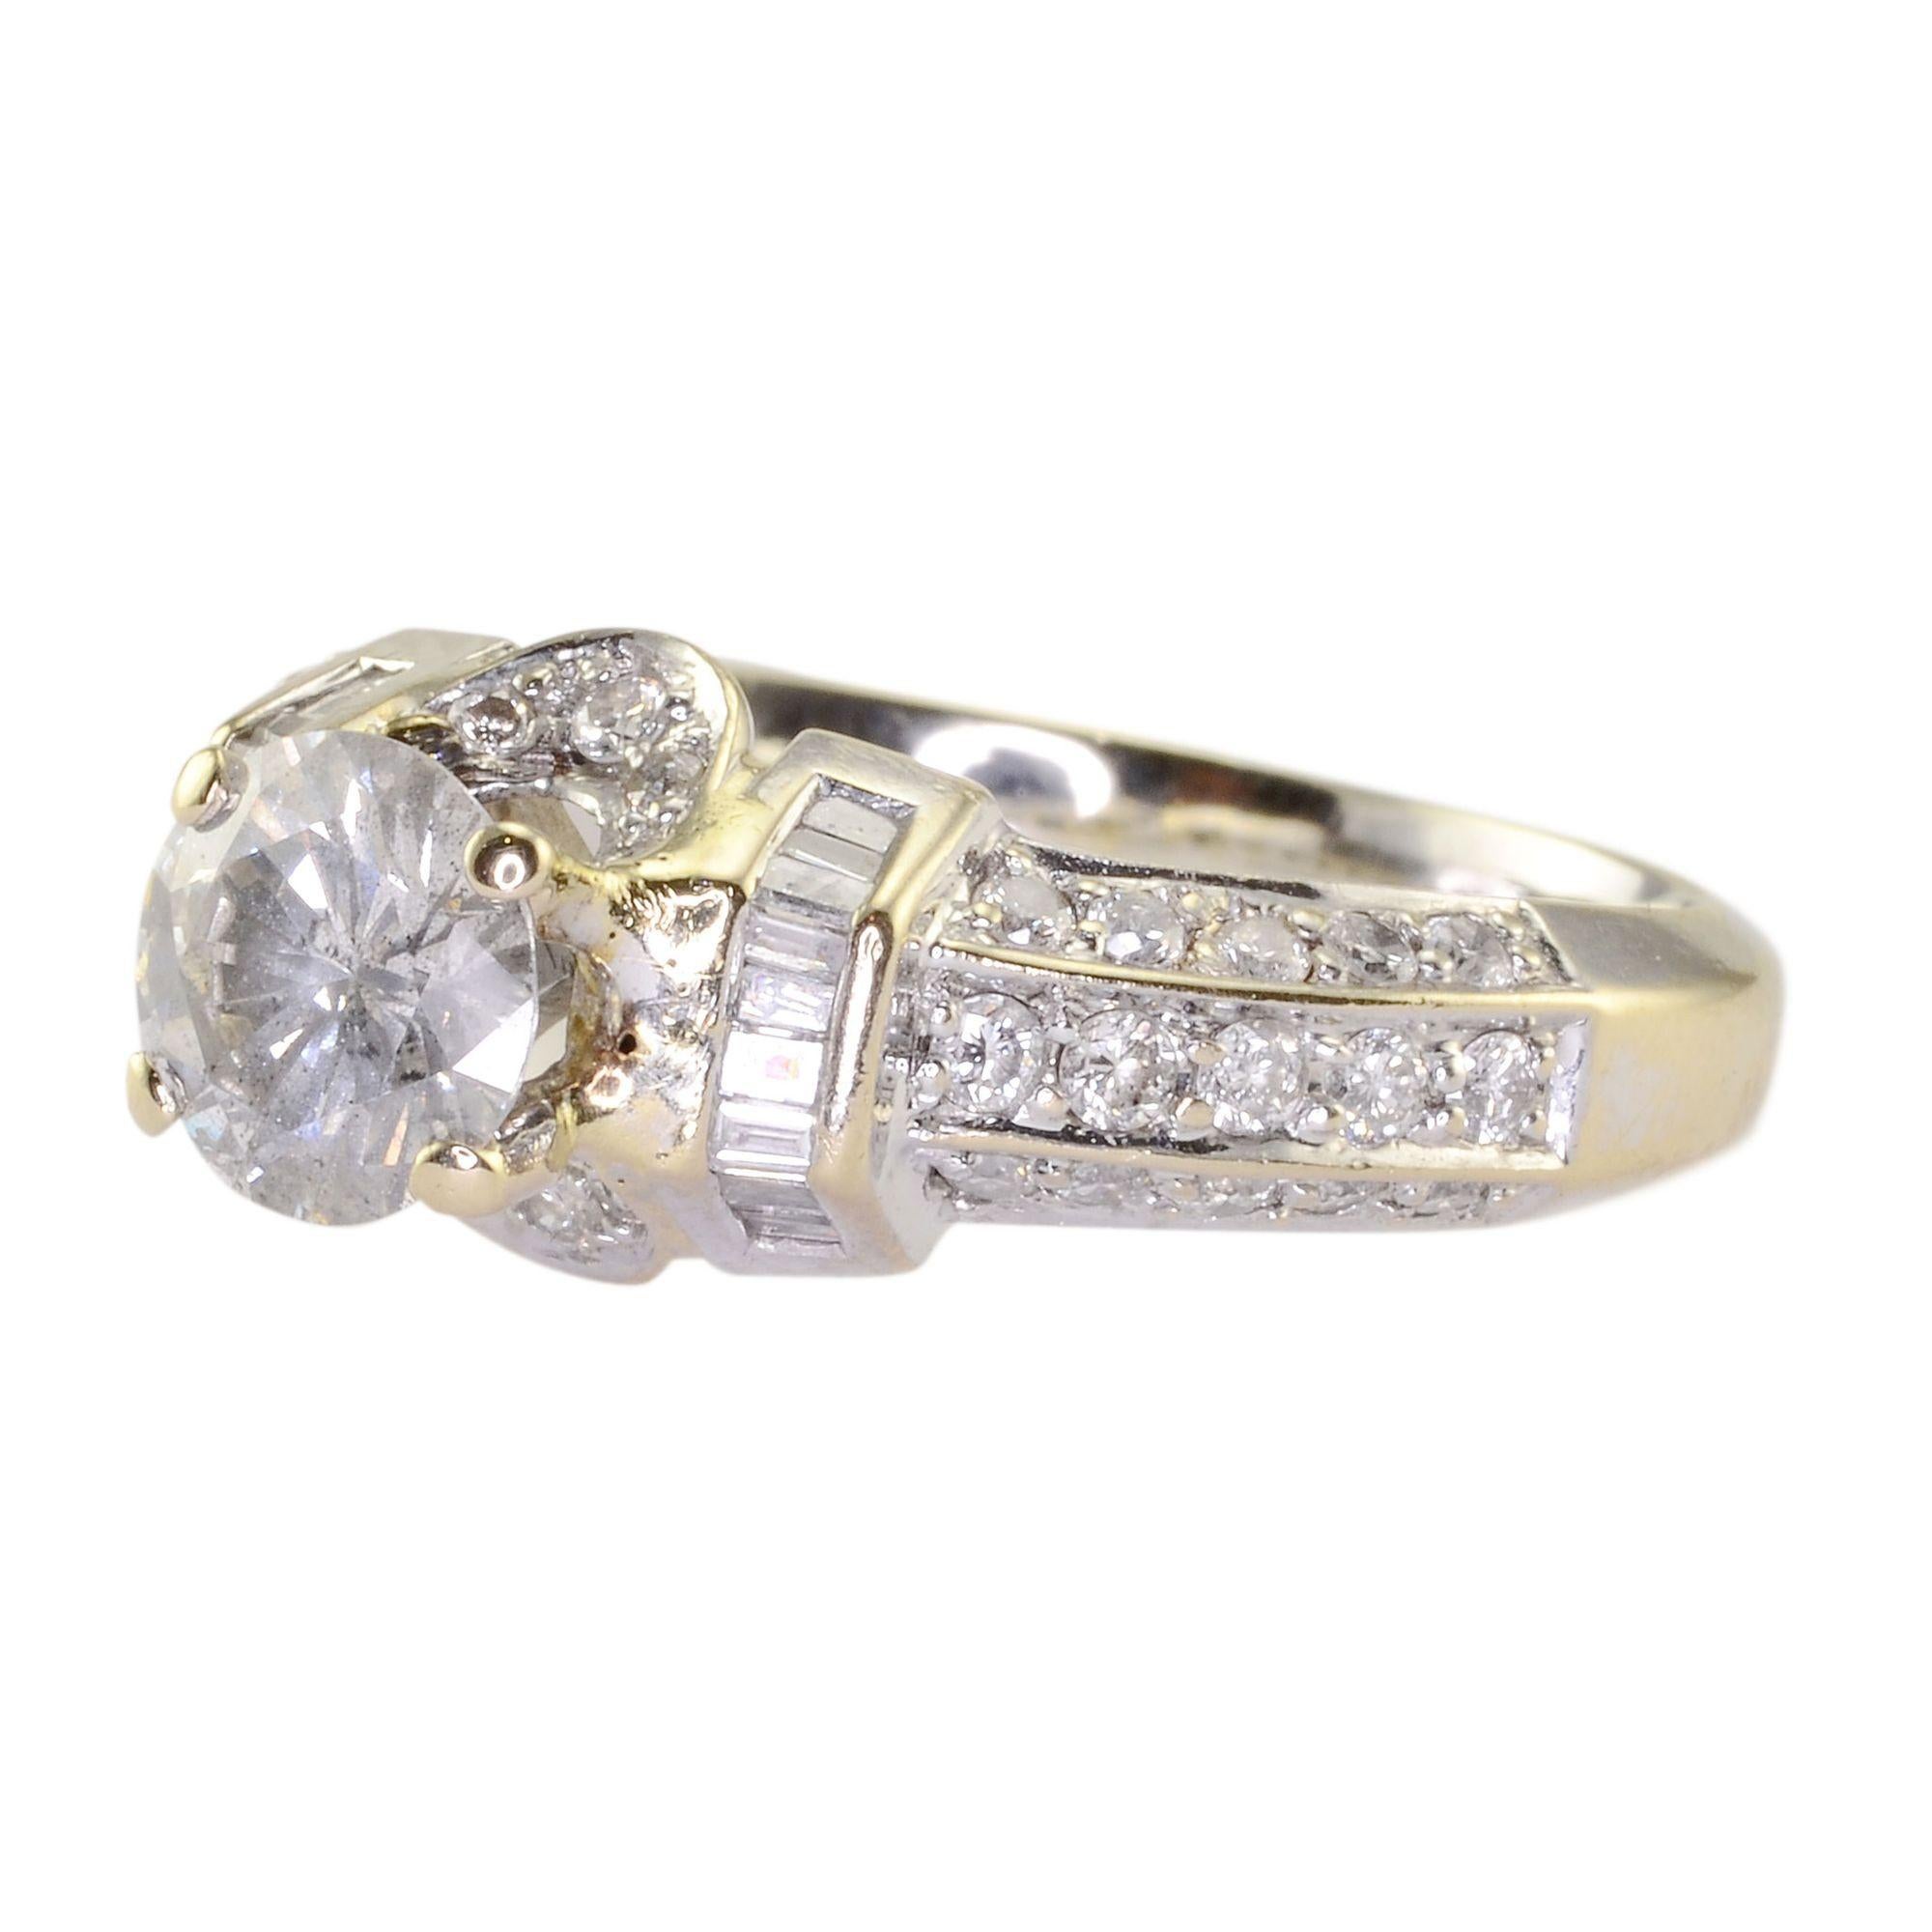 Estate 1.25 carat diamond 18K white gold engagement ring. This ring has one center round diamond at 1.25 carats I2 clarity J-K color with 10 baguette diamonds at 0.20 carat total weight and 36 pave diamonds at 0.33 carat total weight. Appraised at